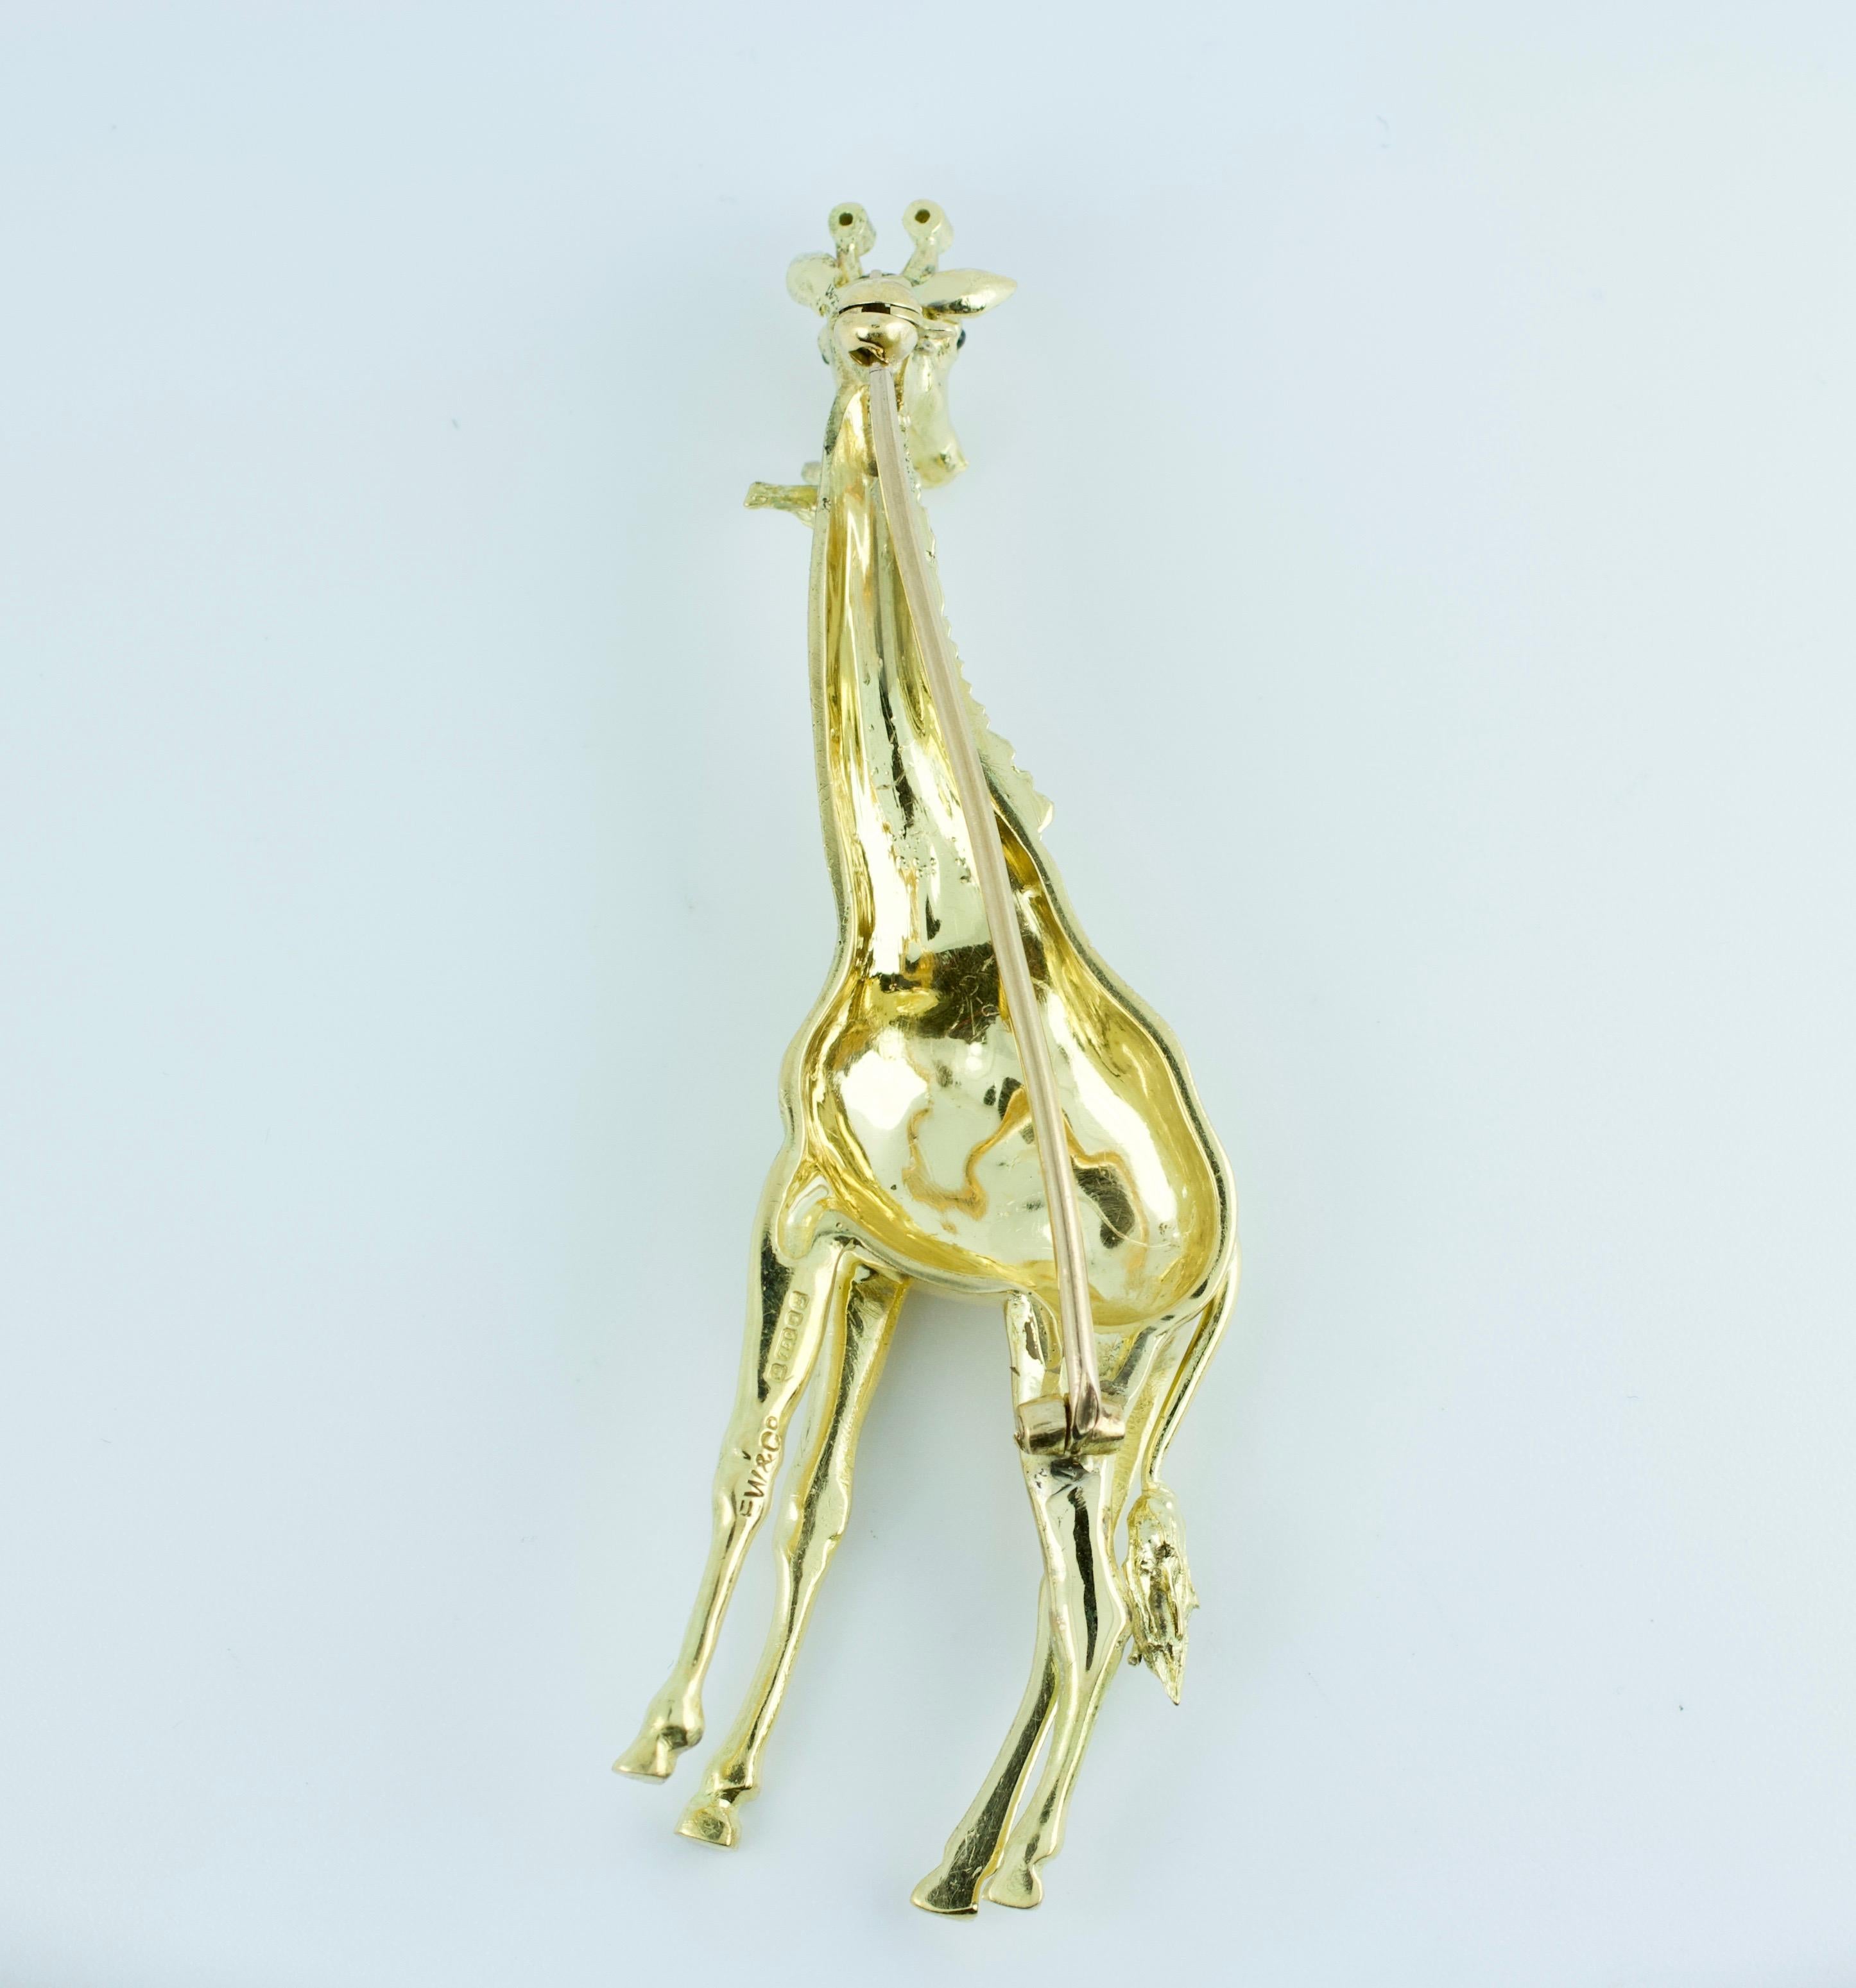 E. Wofle & Co. 18k Yellow Gold Round Diamond Giraffe Pin
20.2 Grams
2.75 Inches tall
1 inch wide
2 Round White Diamonds 
2 Round Beryl Eyes
This is a very unique Pin. It was made by E. Wolfe & Co. and this highly detailed pin also has hallmarks that